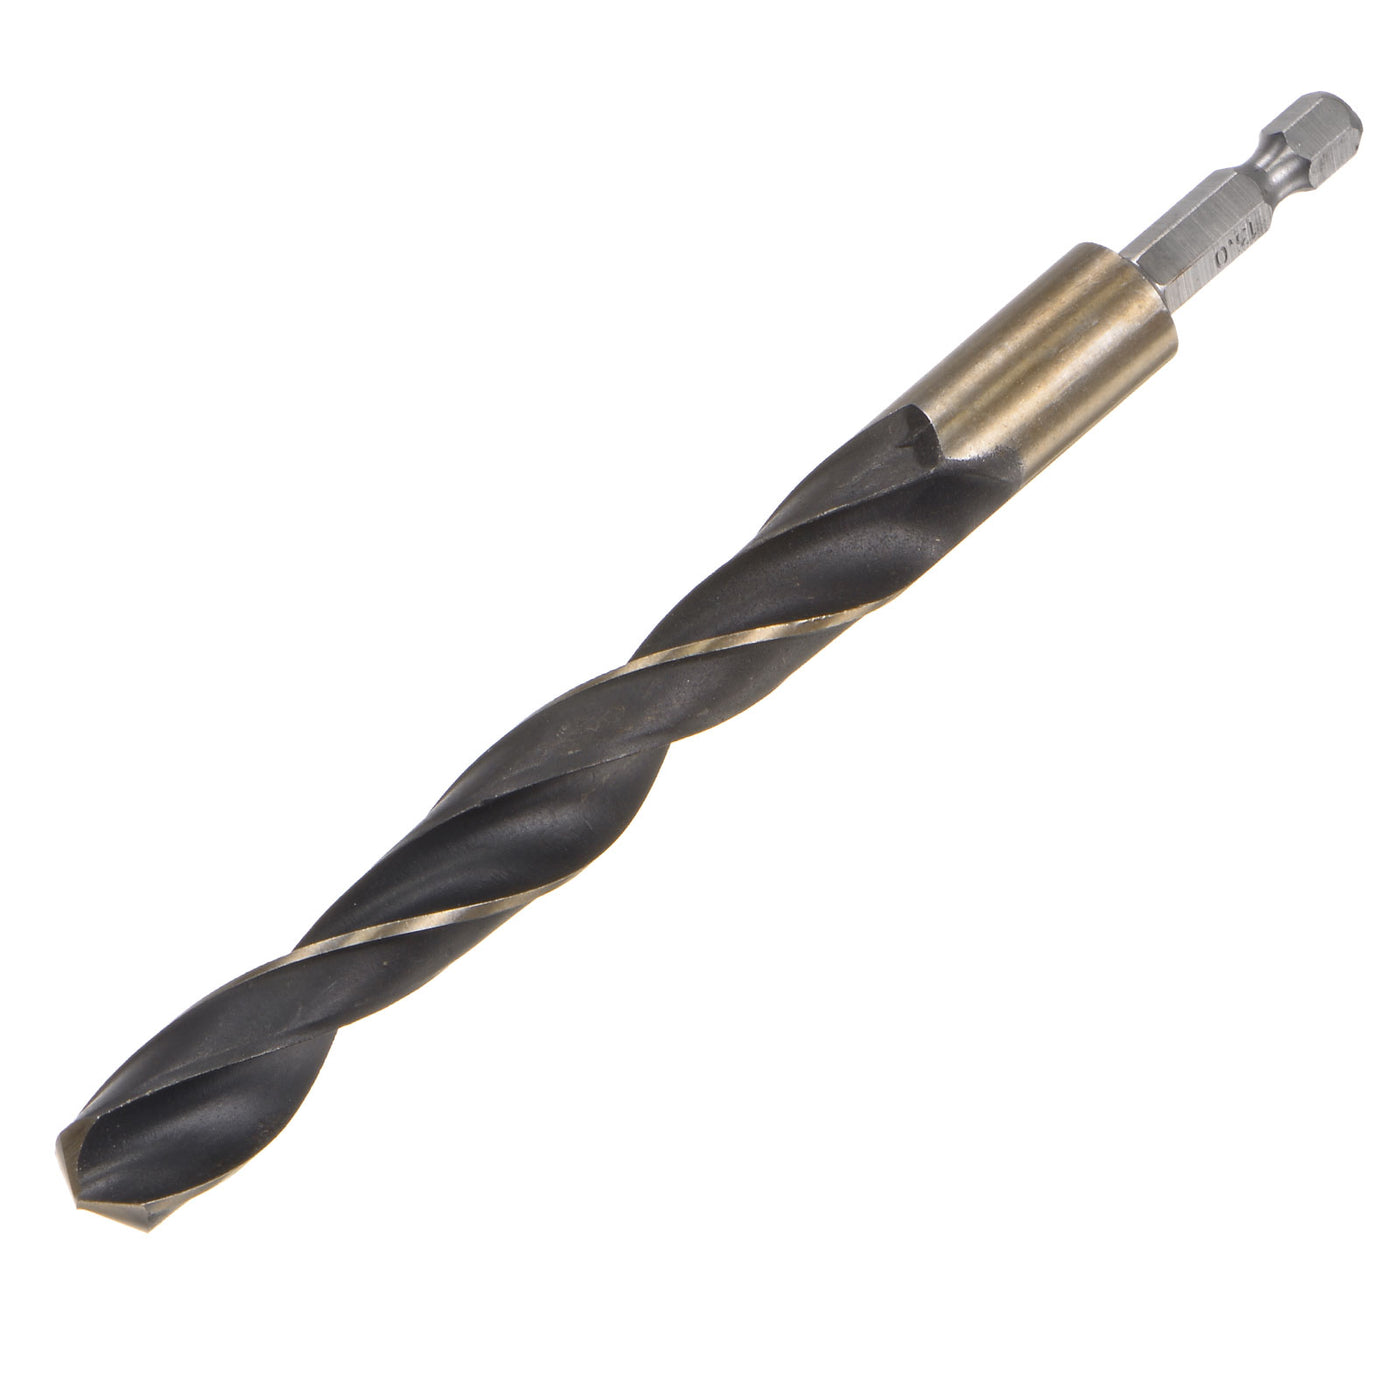 uxcell Uxcell 13mm High Speed Steel Twist Drill Bit with Hex Shank 150mm Length